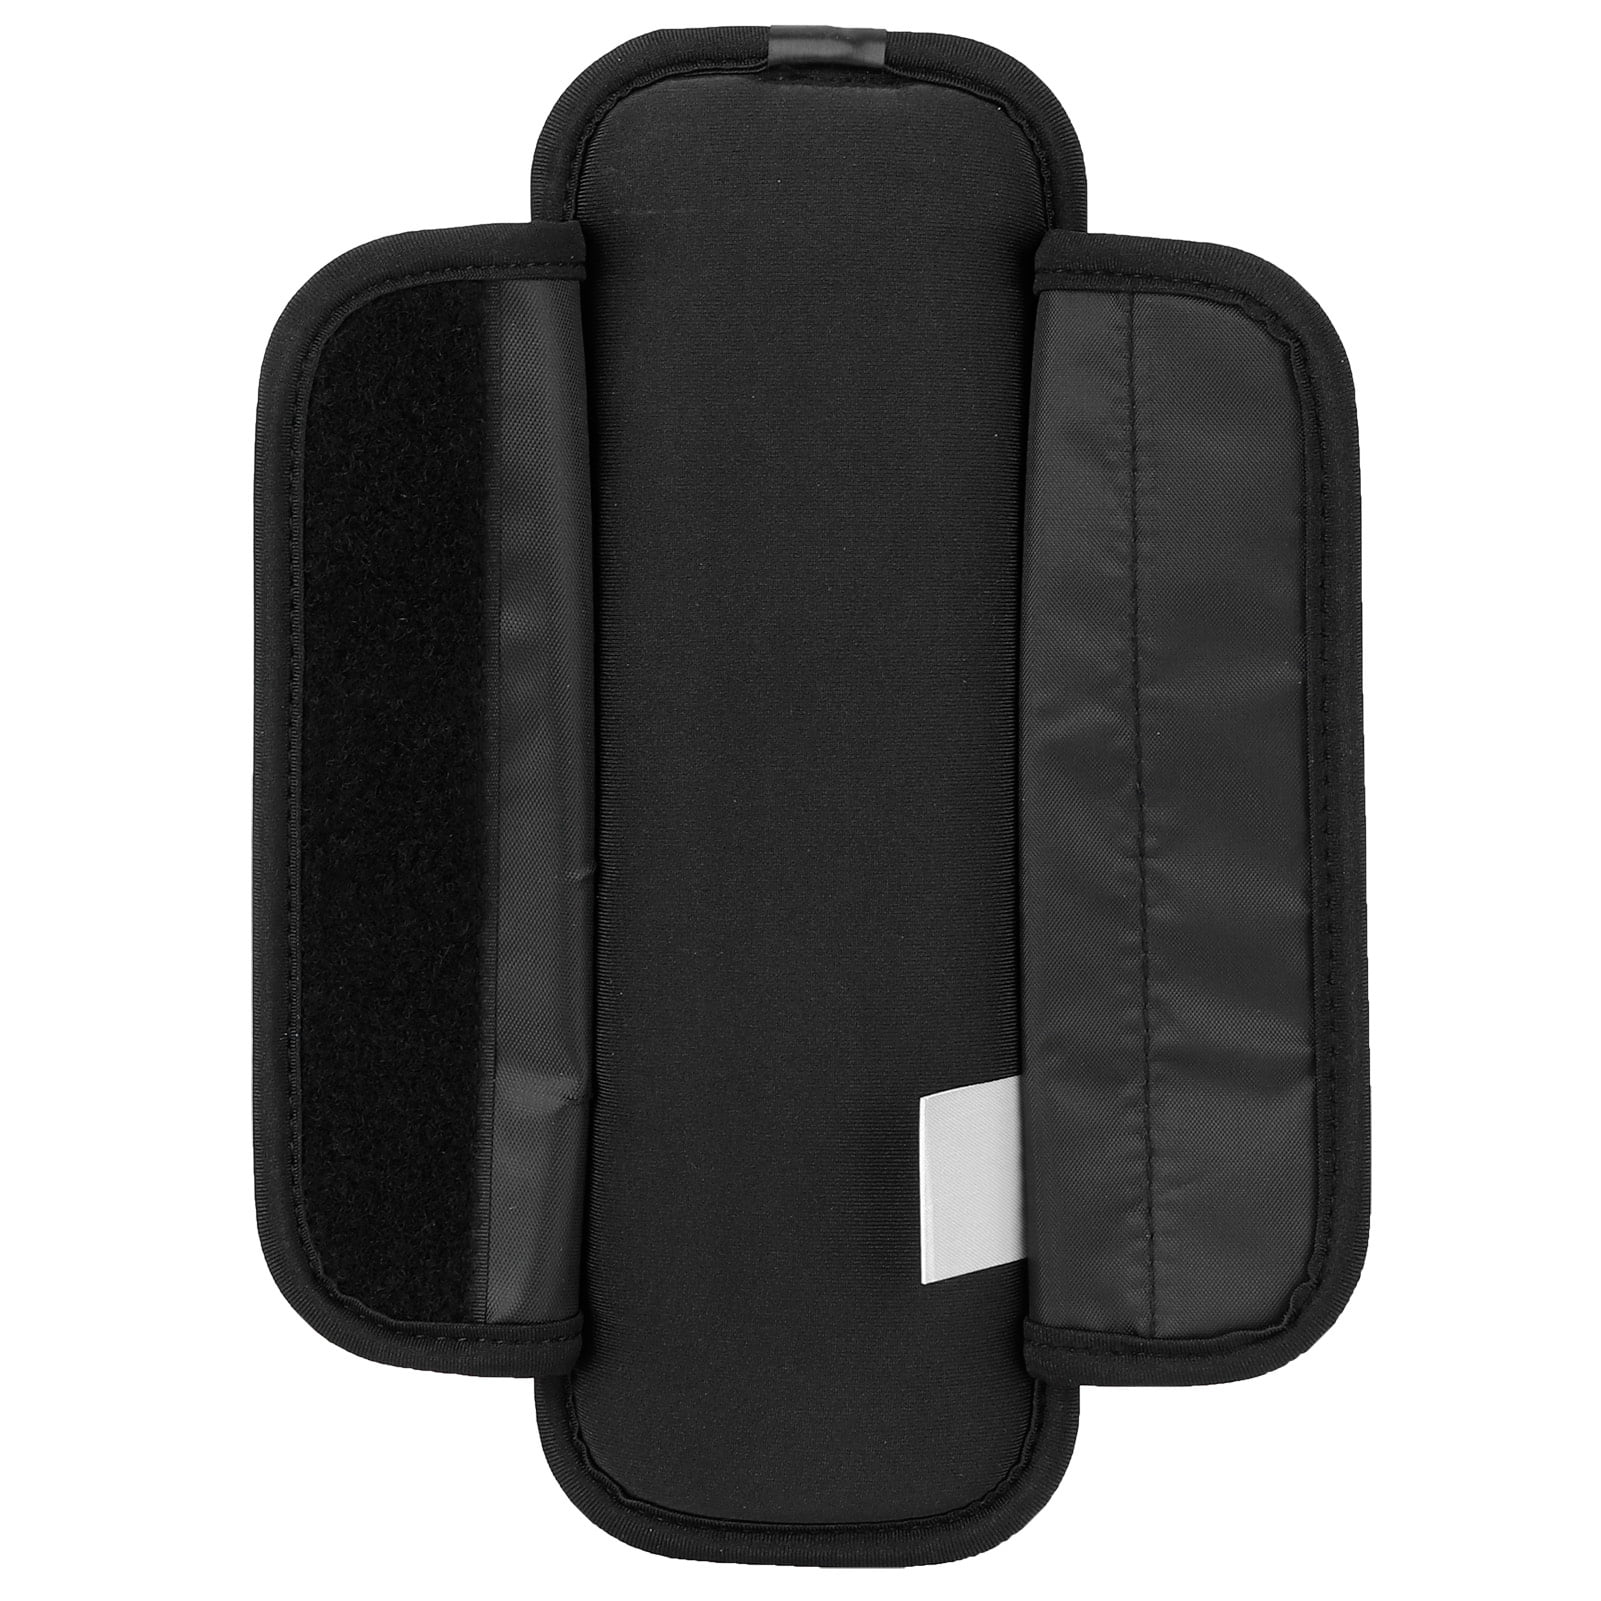 zokagir 2Pcs Shoulder Pads Open at Both Ends and Removable Air Cushion Pad  for Shoulder Bags Shoulder Strap Pad